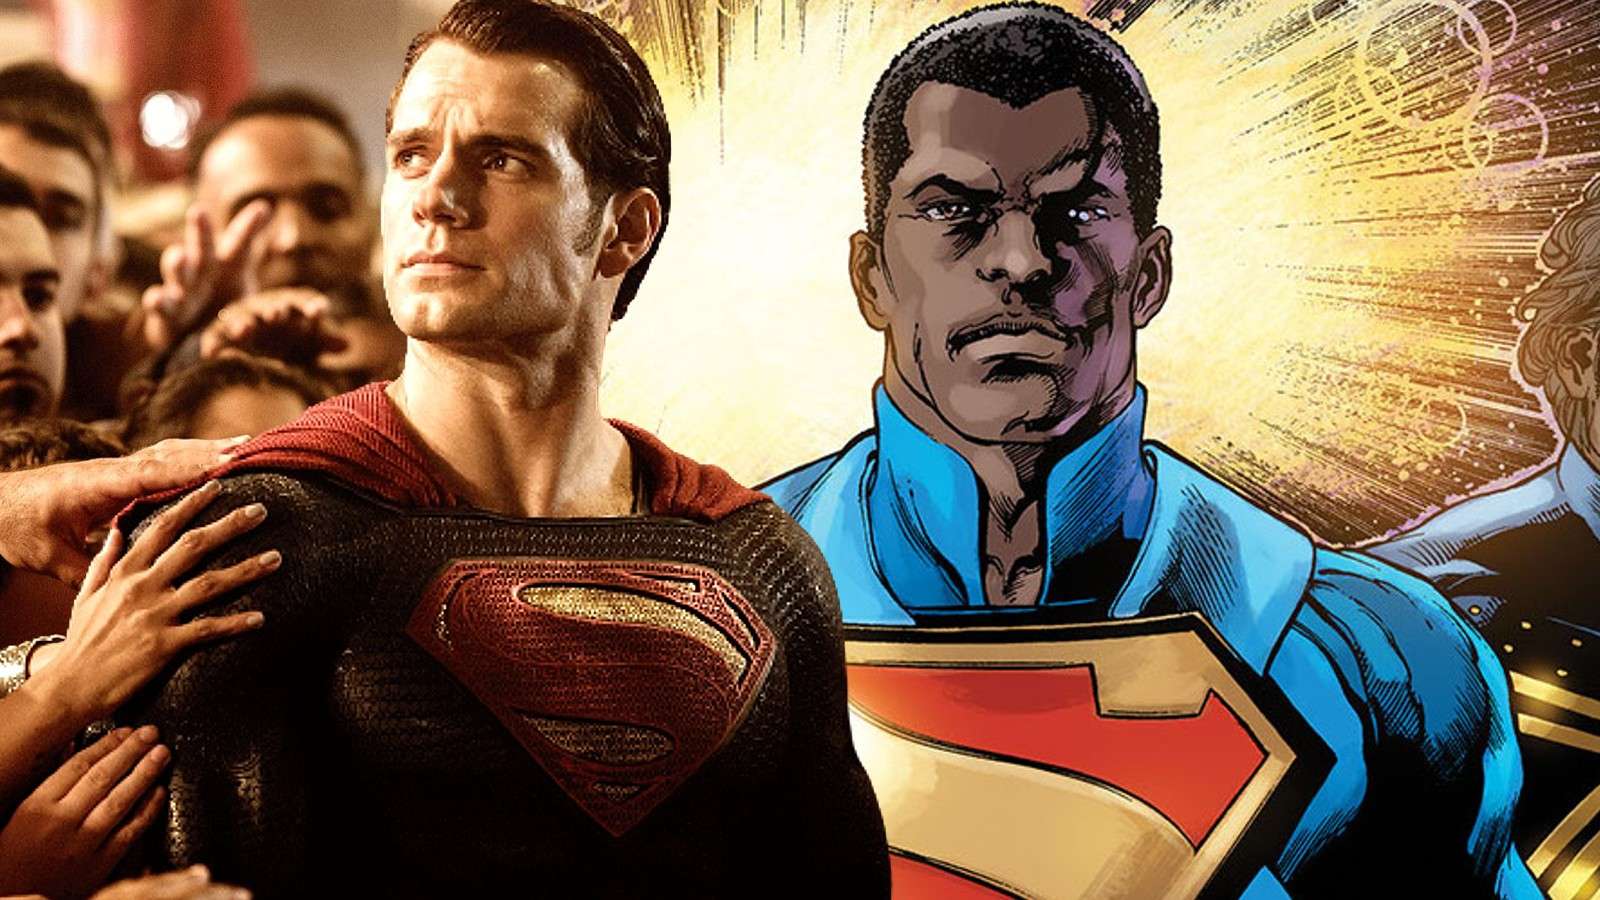 Henry Cavill as Superman and Black Superman